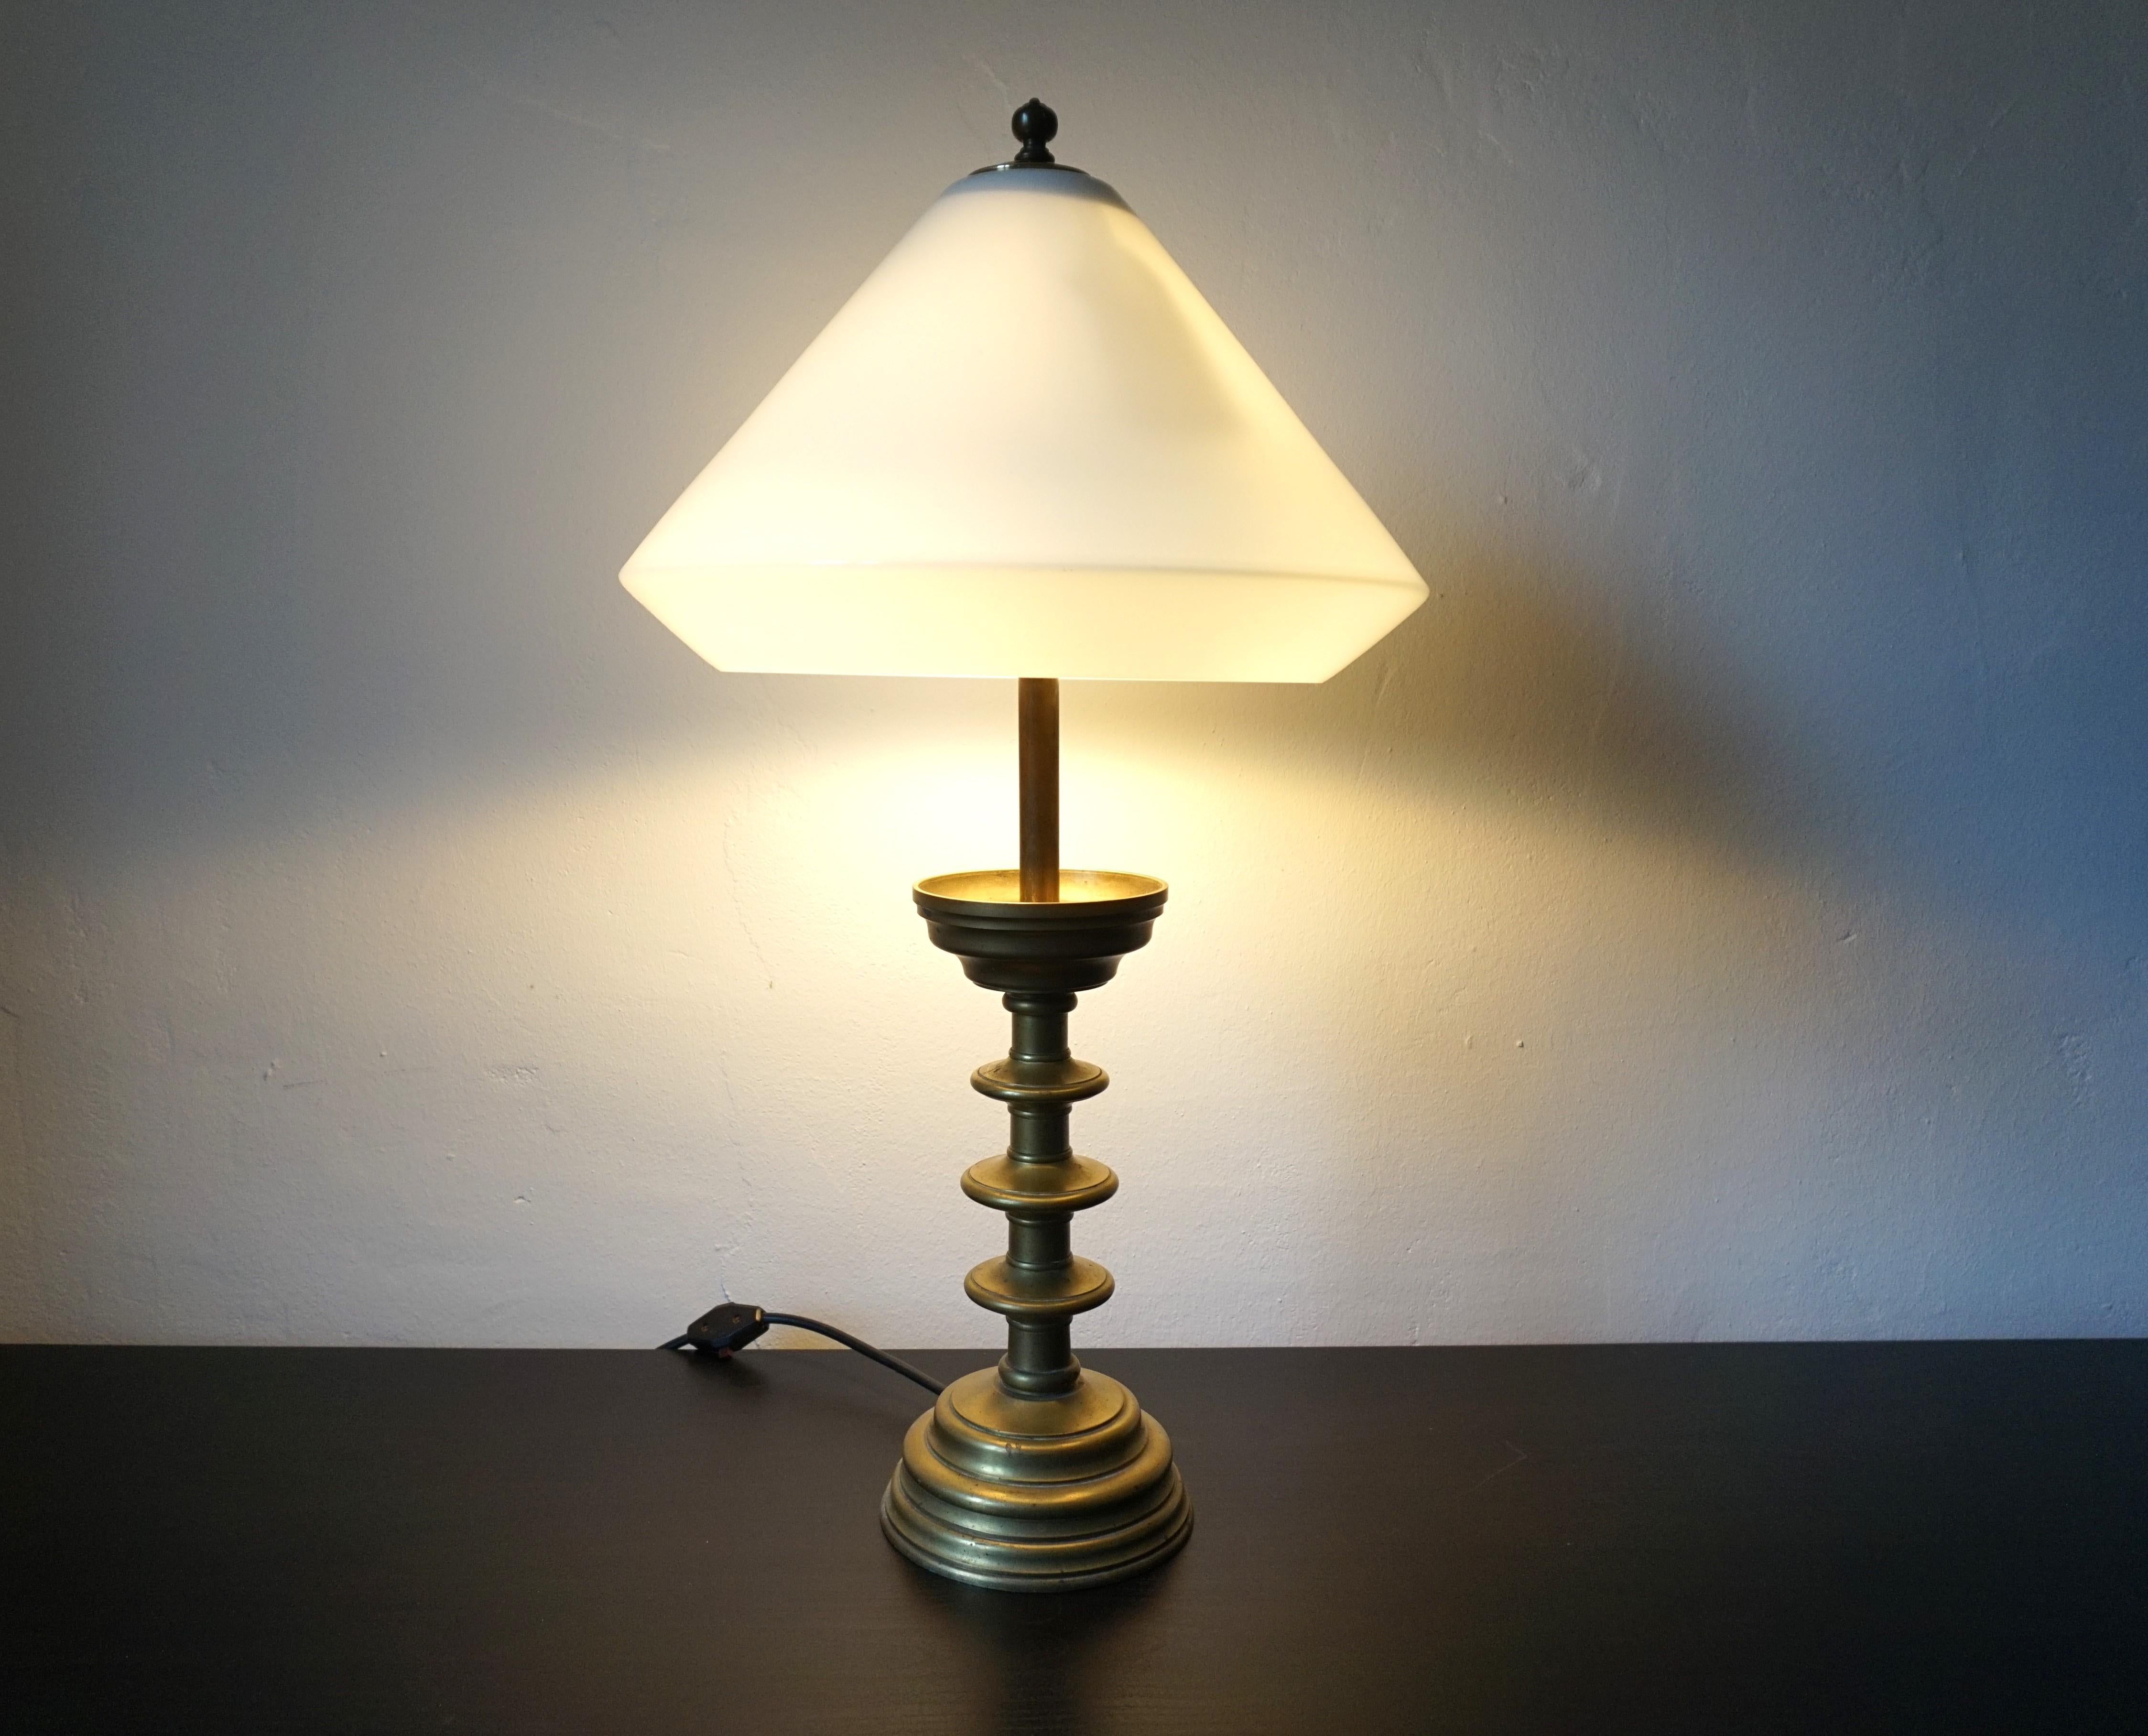 This well proportioned solid brass table lamp comes in excellent condition with a fantastic patinated lamp base.  The foot consists of several plate-like elements and is formed into a bowl at the top. The cone-like lampshade made of light opal glass